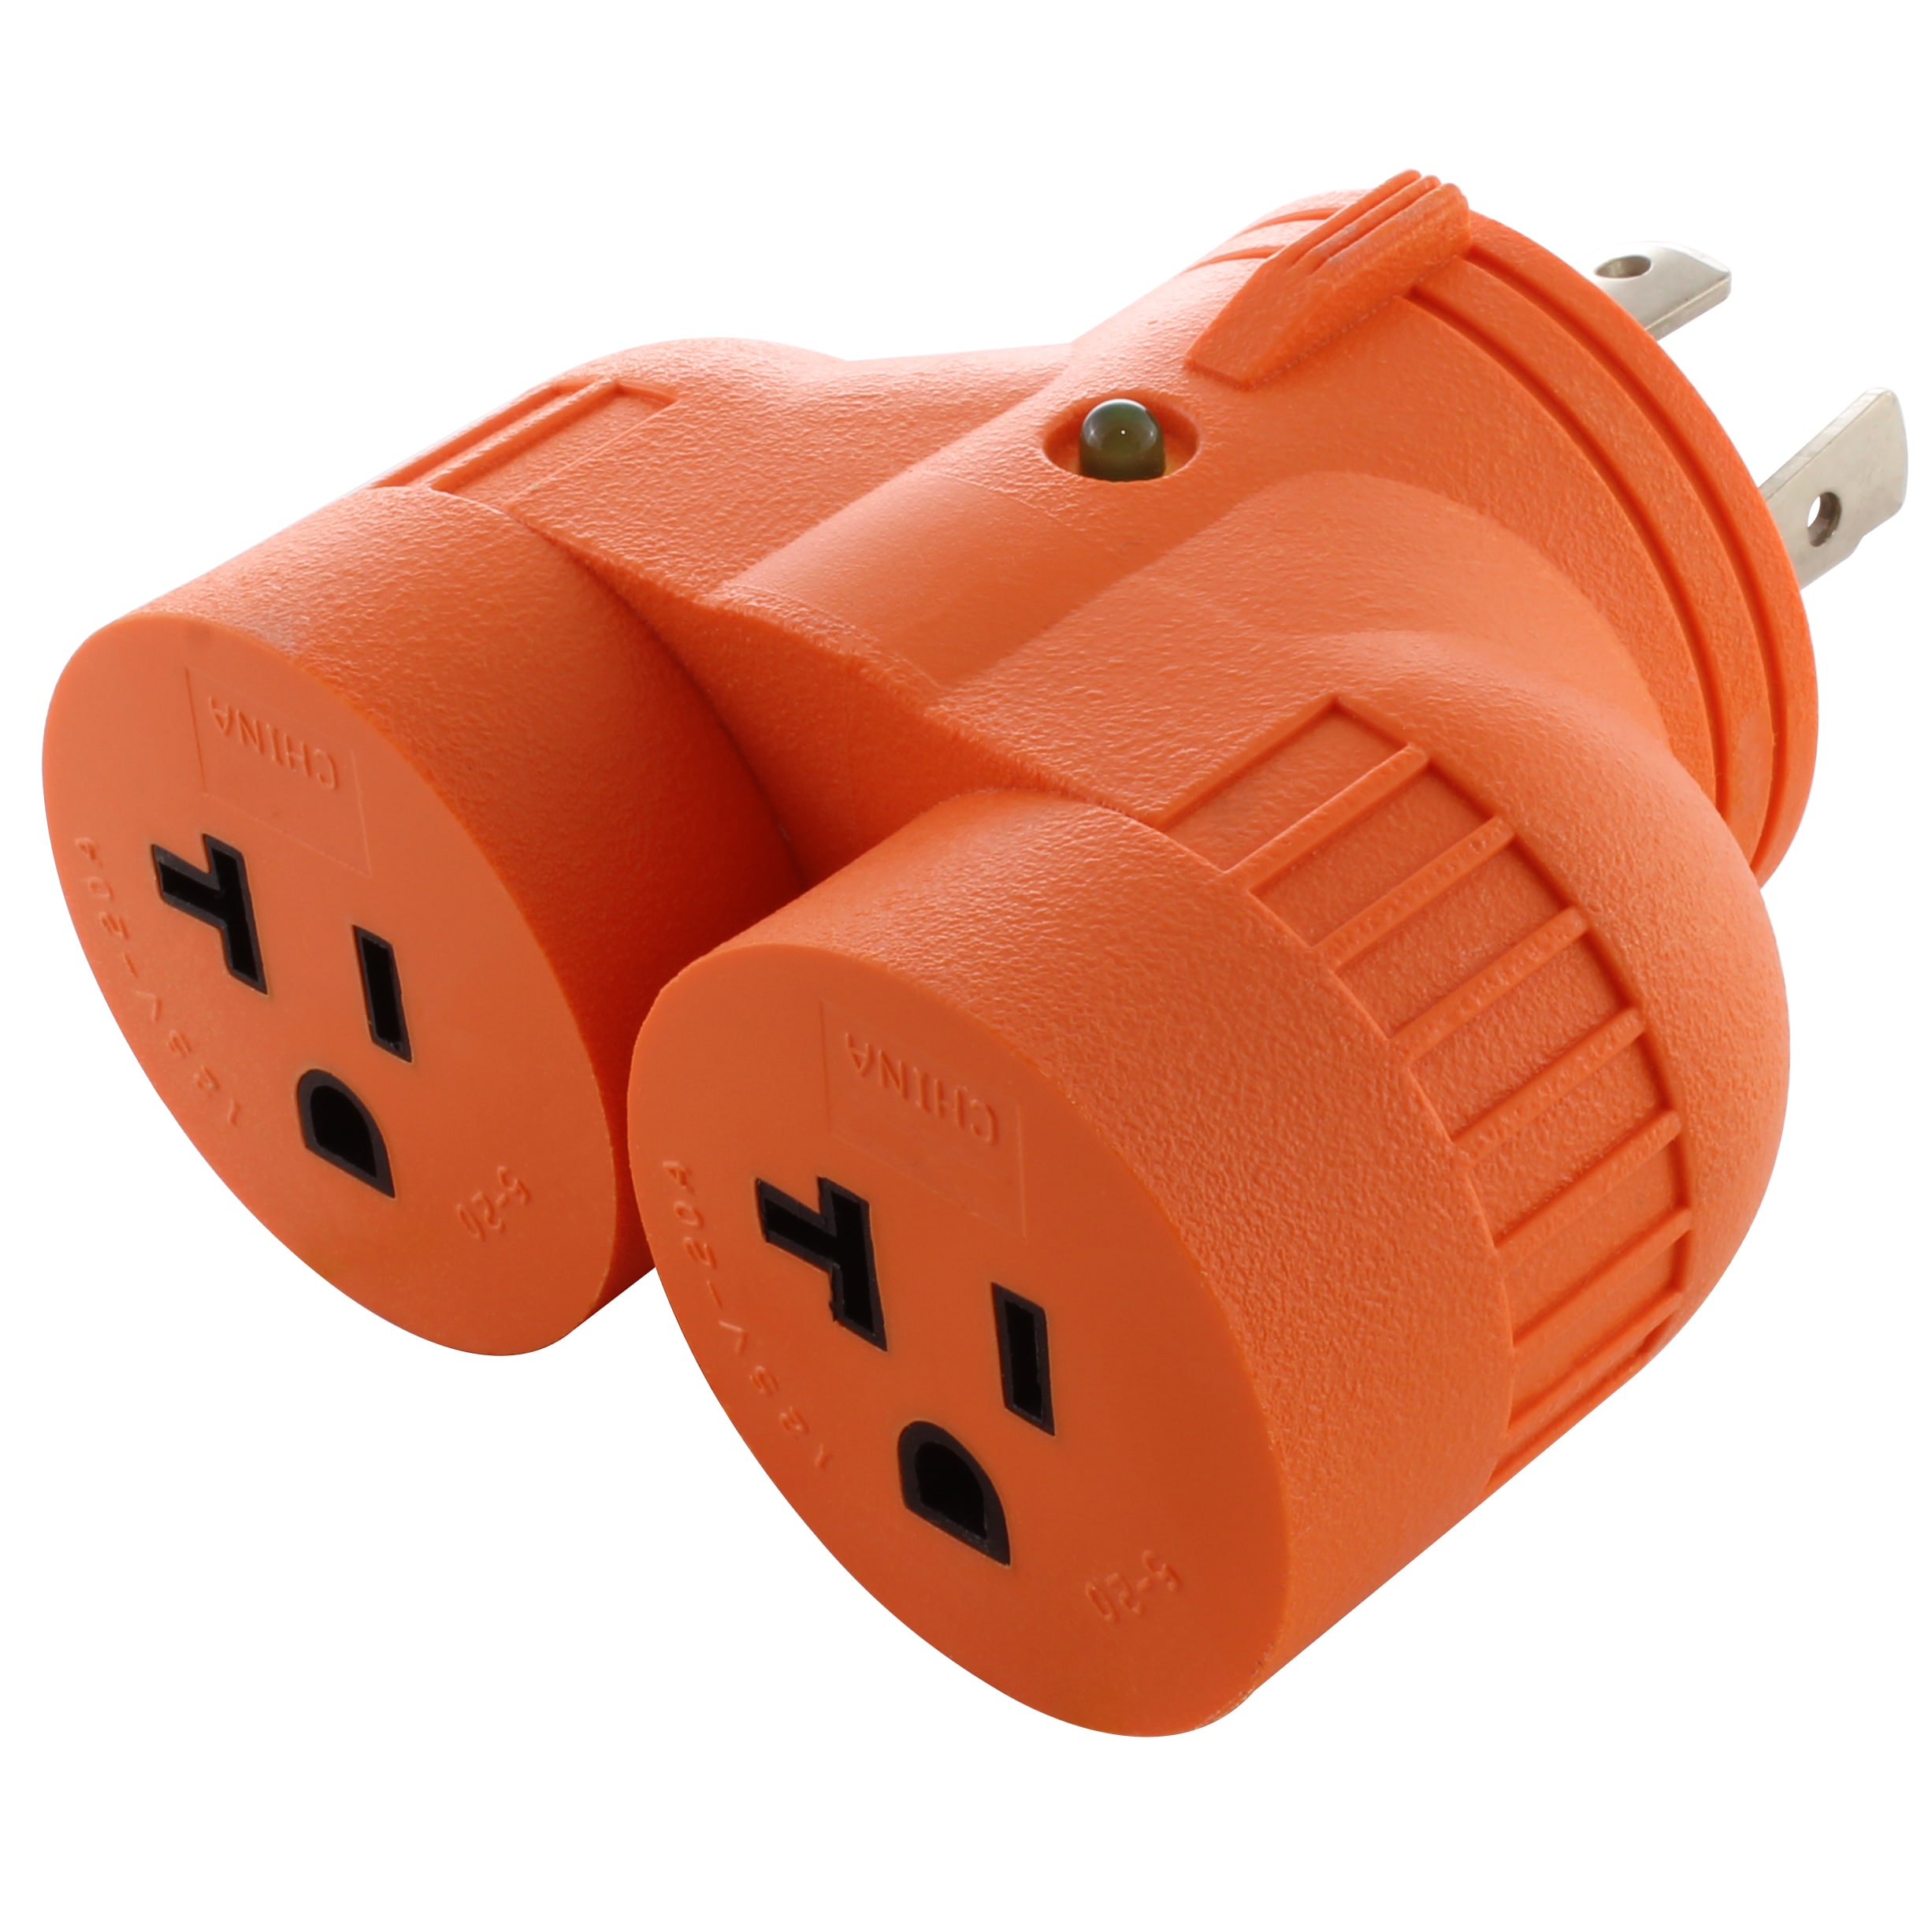 Southwire Gas Range Adapter